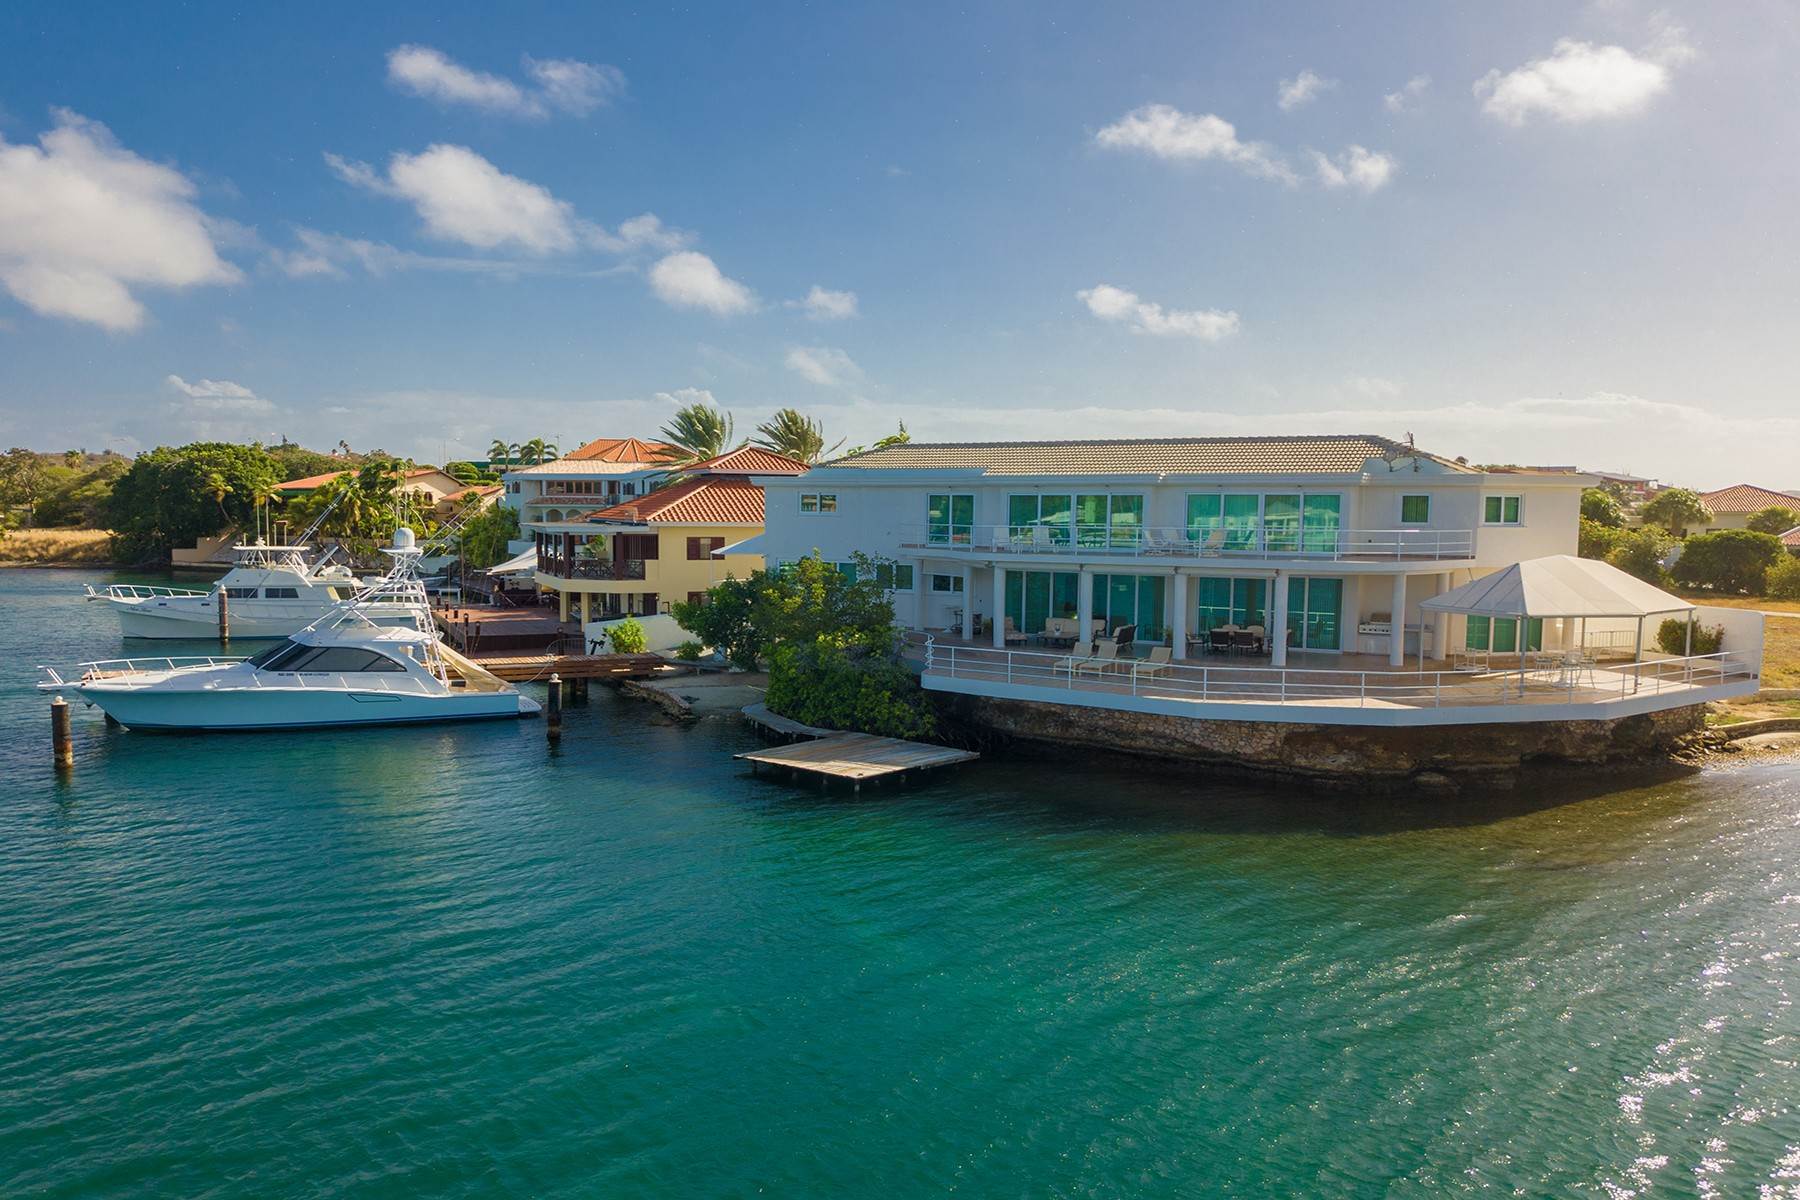 Property for sale at Jan Sofat Grand Waterfront Villa 1D Jan Sofat, Willemstad, Curacao